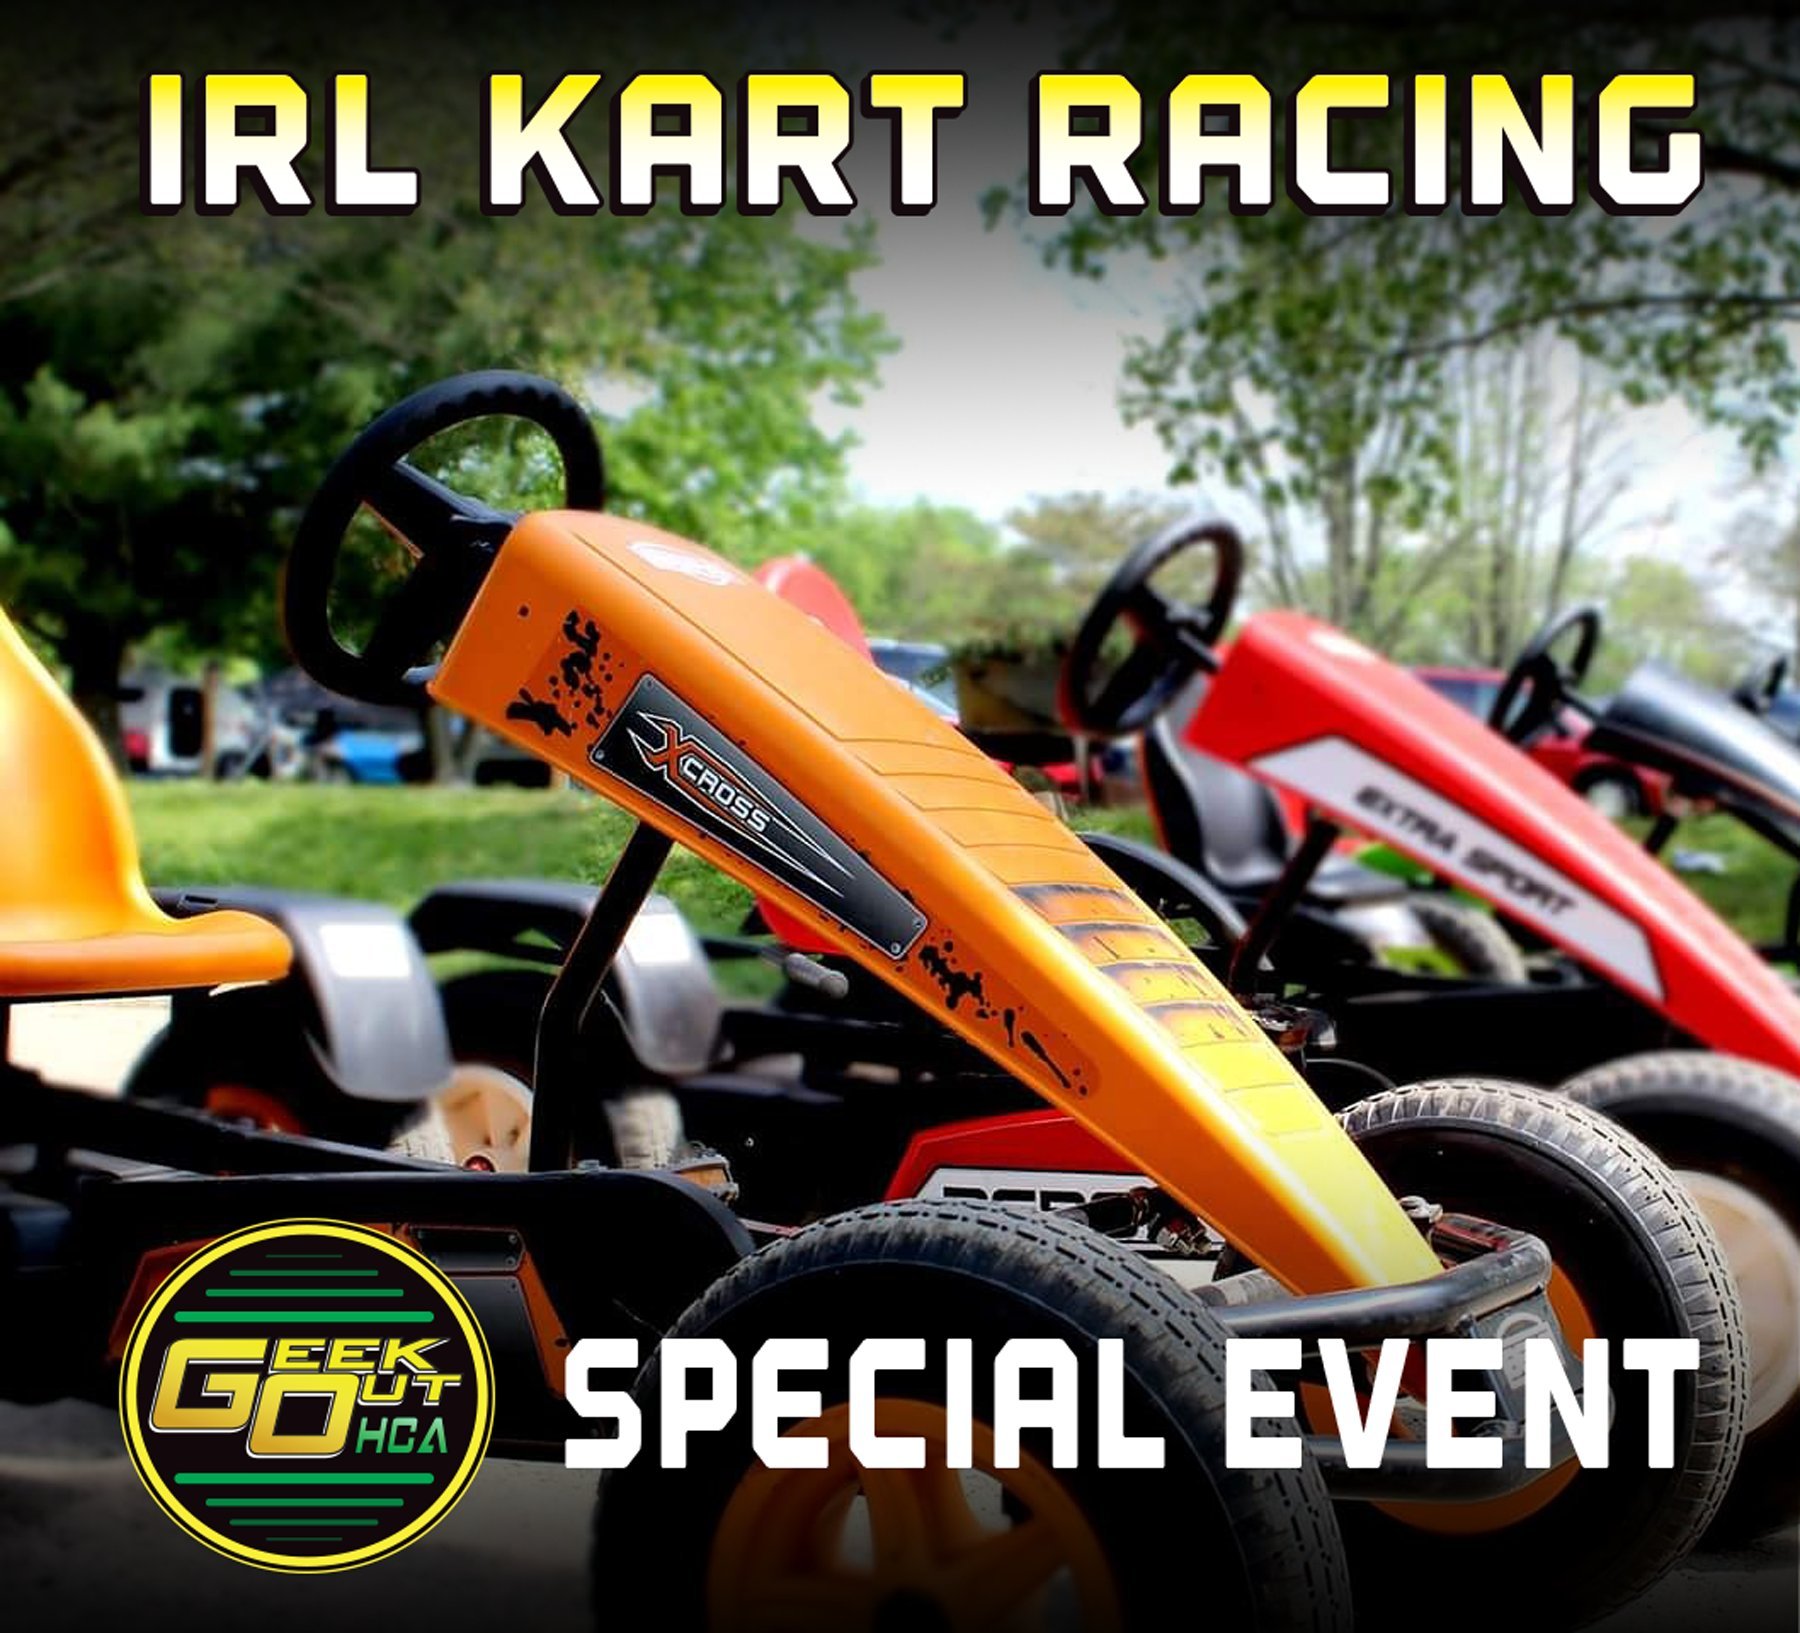   Ready.. Set... Let's-a GOOOOOO! IRL Kart Racing is back again start training your legs and get your throwing arm ready so you'll be ready to own your friends in some peddle kart shenanigans!  